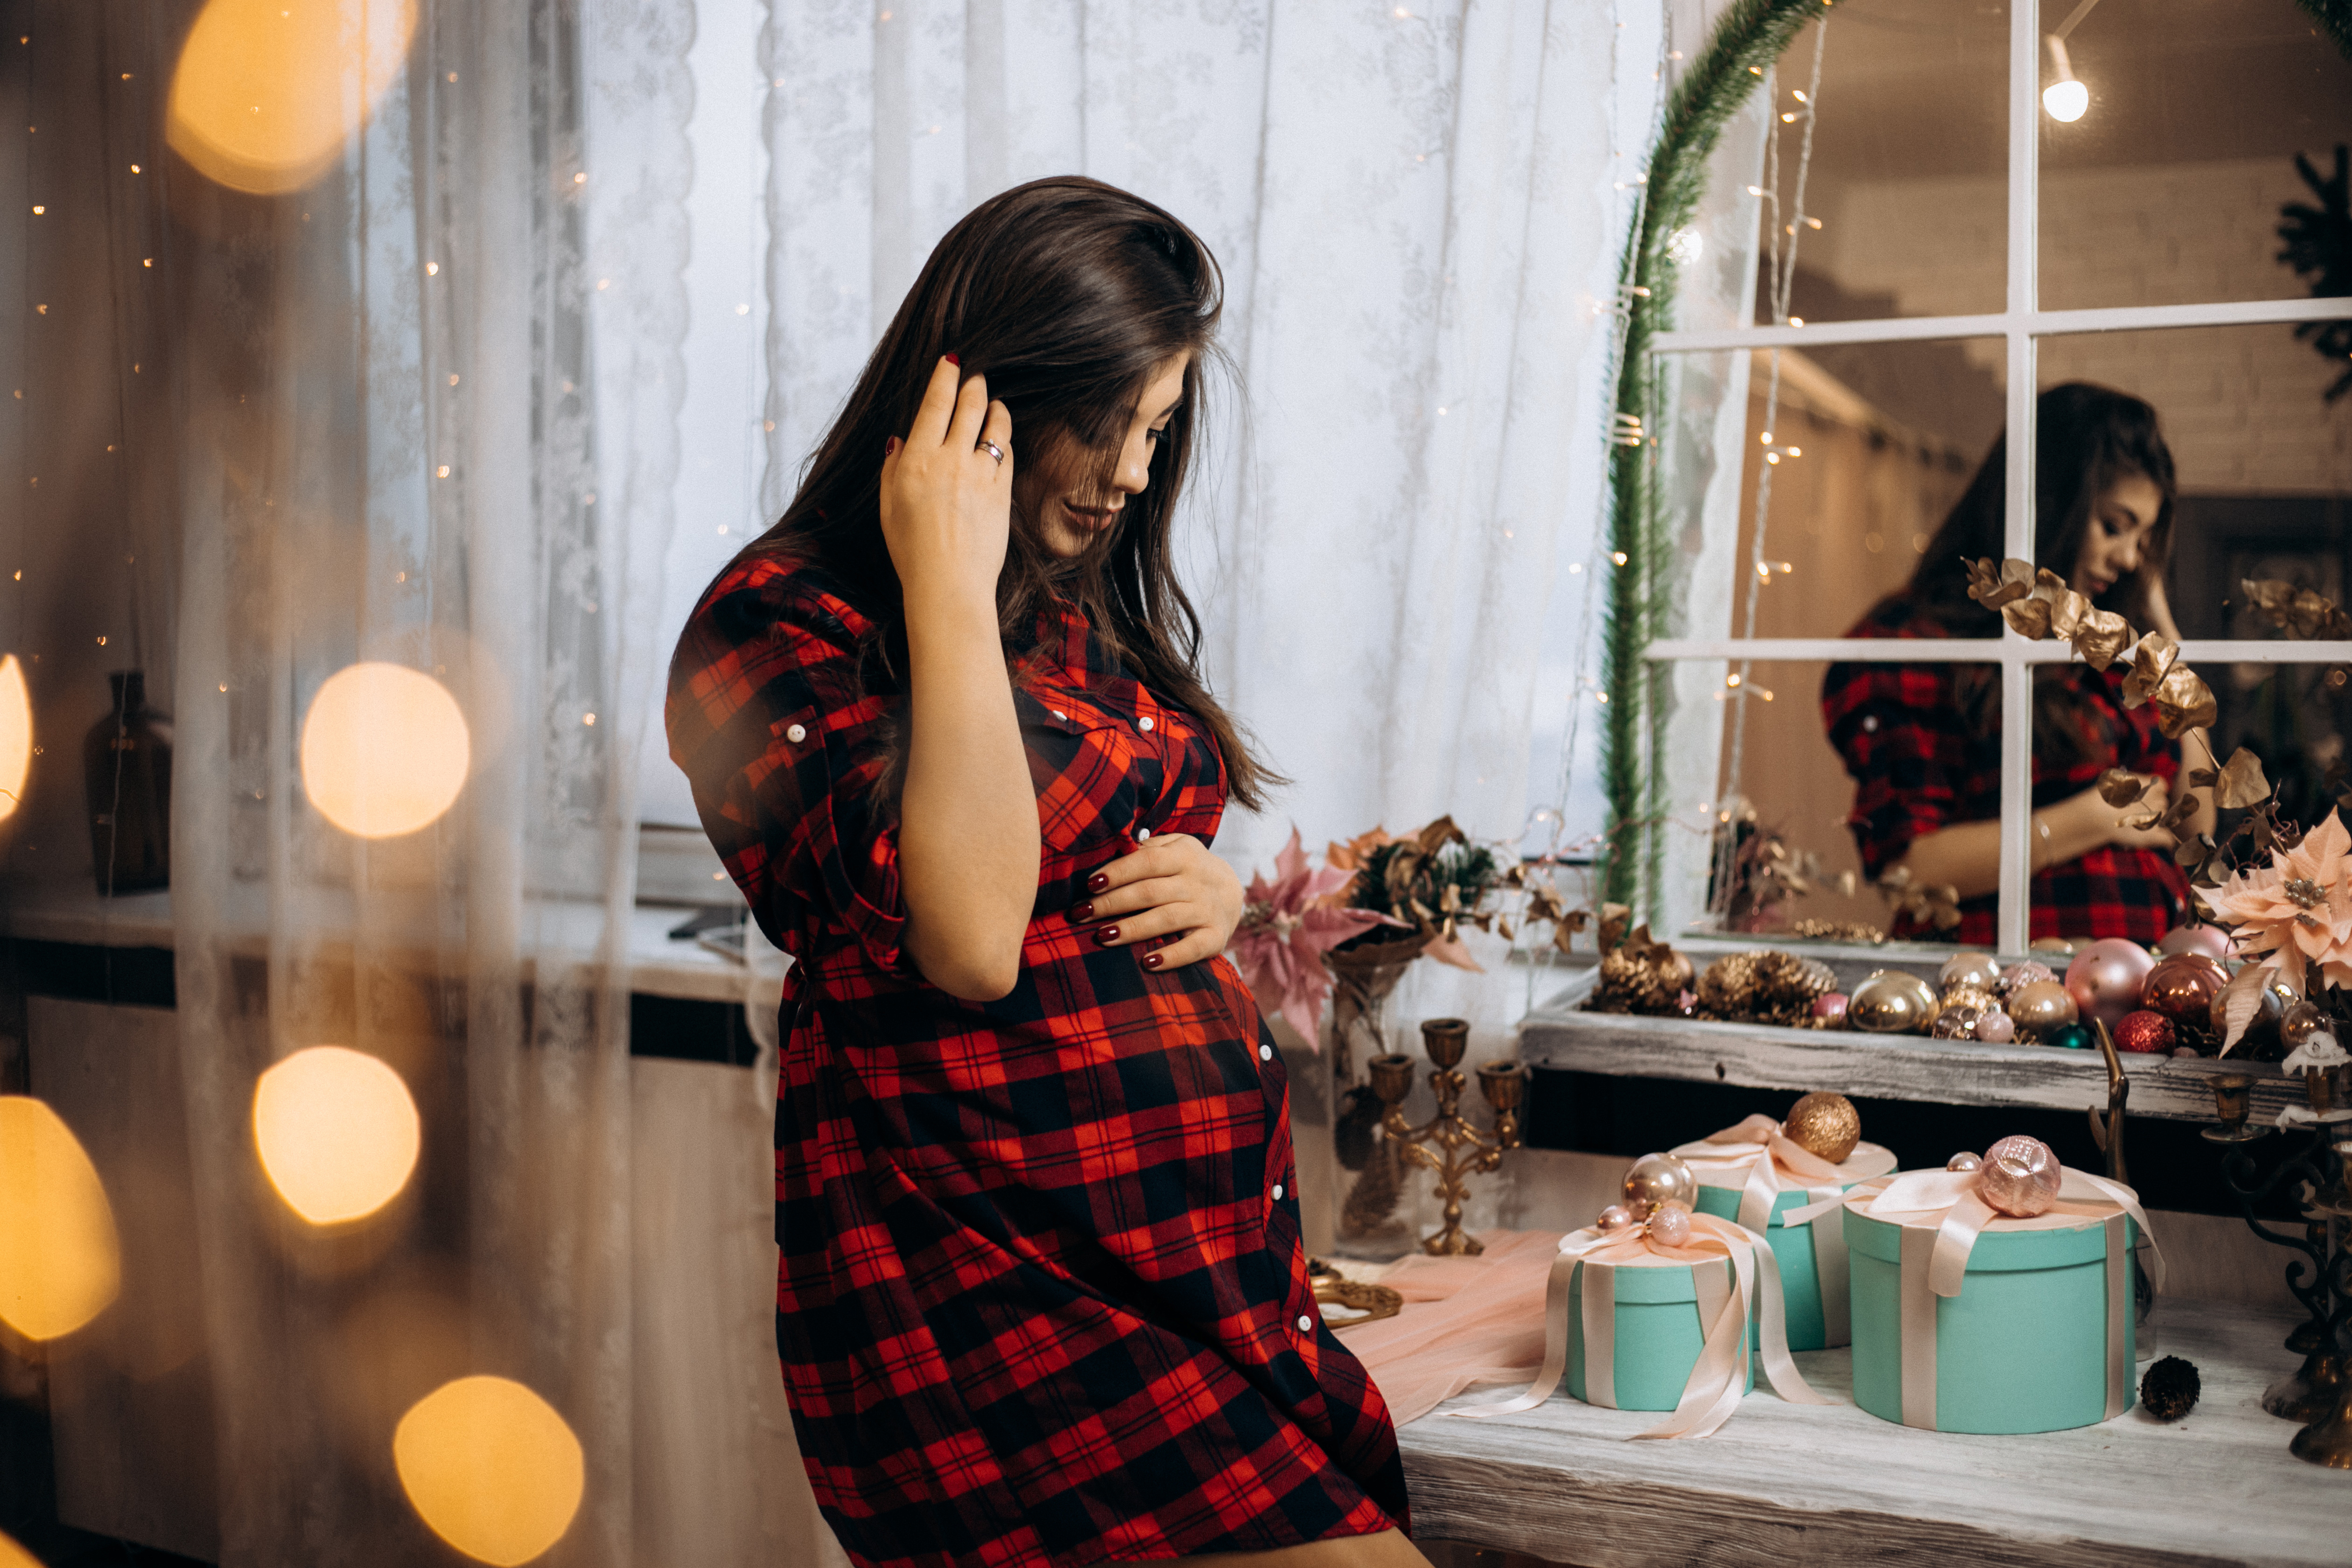 18 Unique Maternity Photo Ideas to Show Off Your Baby Bump | LoveToKnow